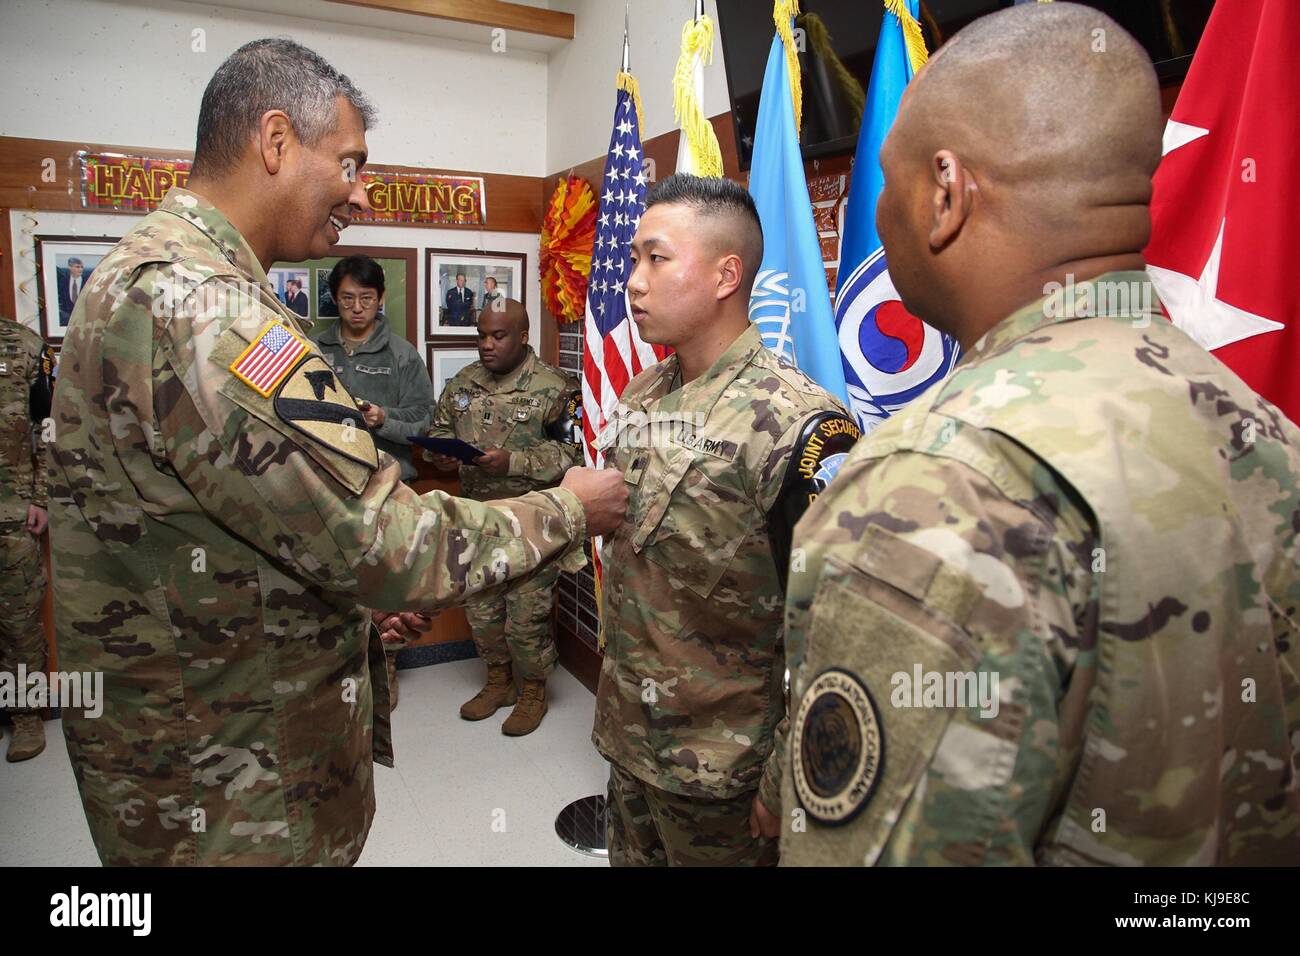 Paju, South Korea. 23rd November, 2017. U.S. Army Gen. Vincent Brooks, U.S. and U.N. Forces Korea commander, left, presents the Army Commendation medal to U.S. and South Korean soldiers during a Thanksgiving Day ceremony at Camp Bonifas on the Demilitarized Zone November 23, 2017 in Paju, South Korea. The soldiers were recognition for their efforts in rescuing a North Korean defector on November 13th. Credit: Planetpix/Alamy Live News Stock Photo